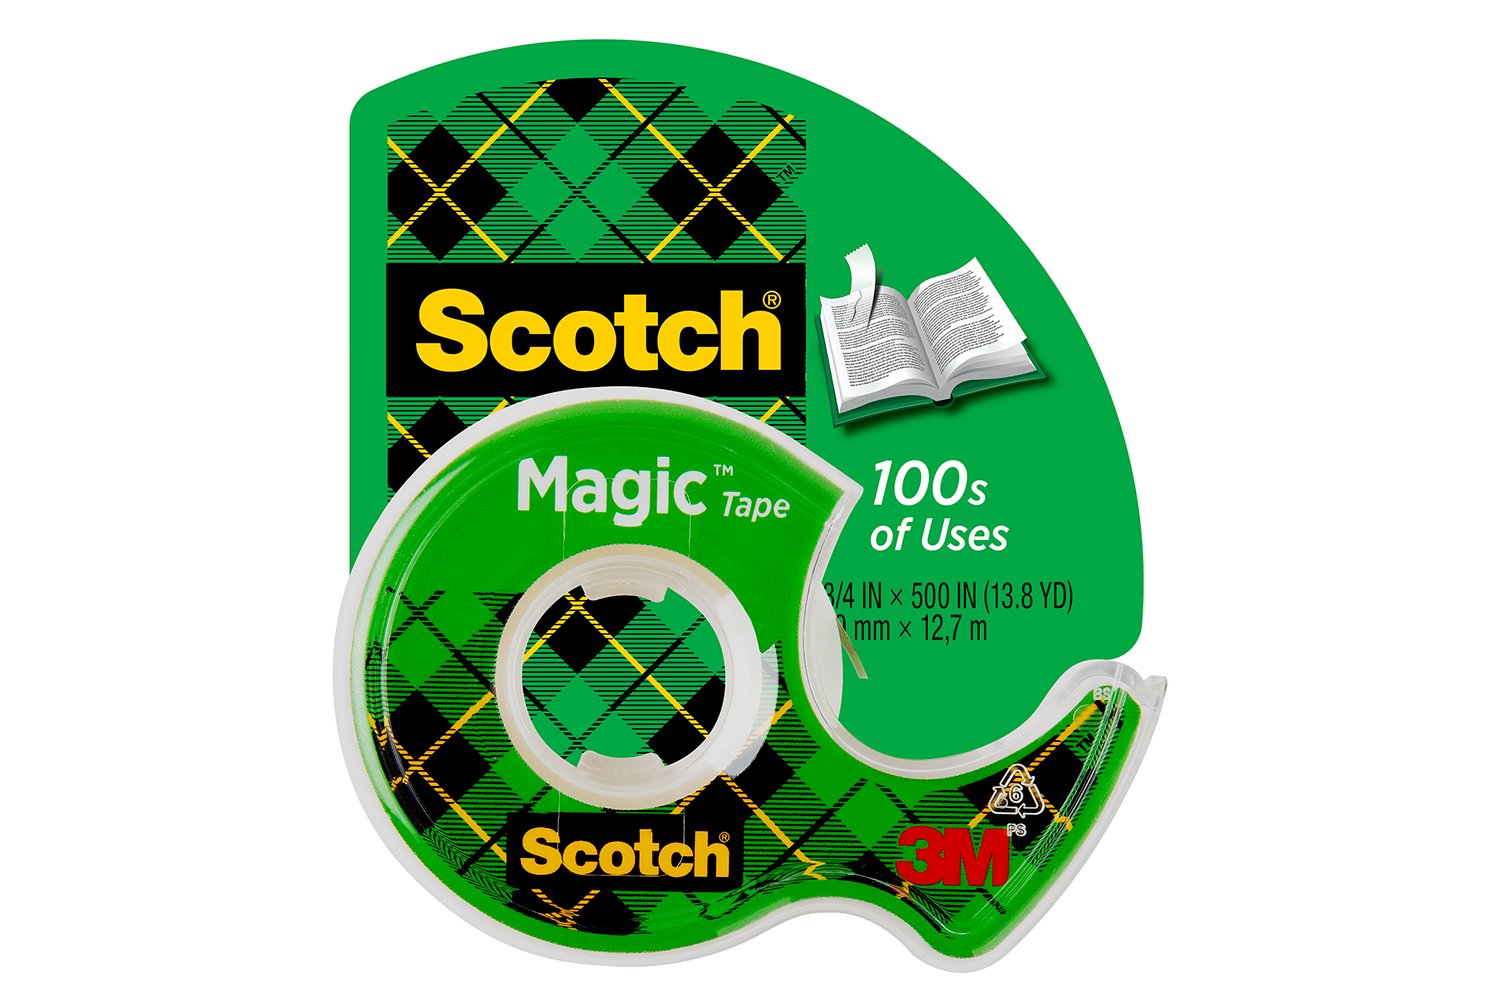 Scotch Tape Runner Refill.31 in x 16.3 yd (055-R-CFT), Pack of 3